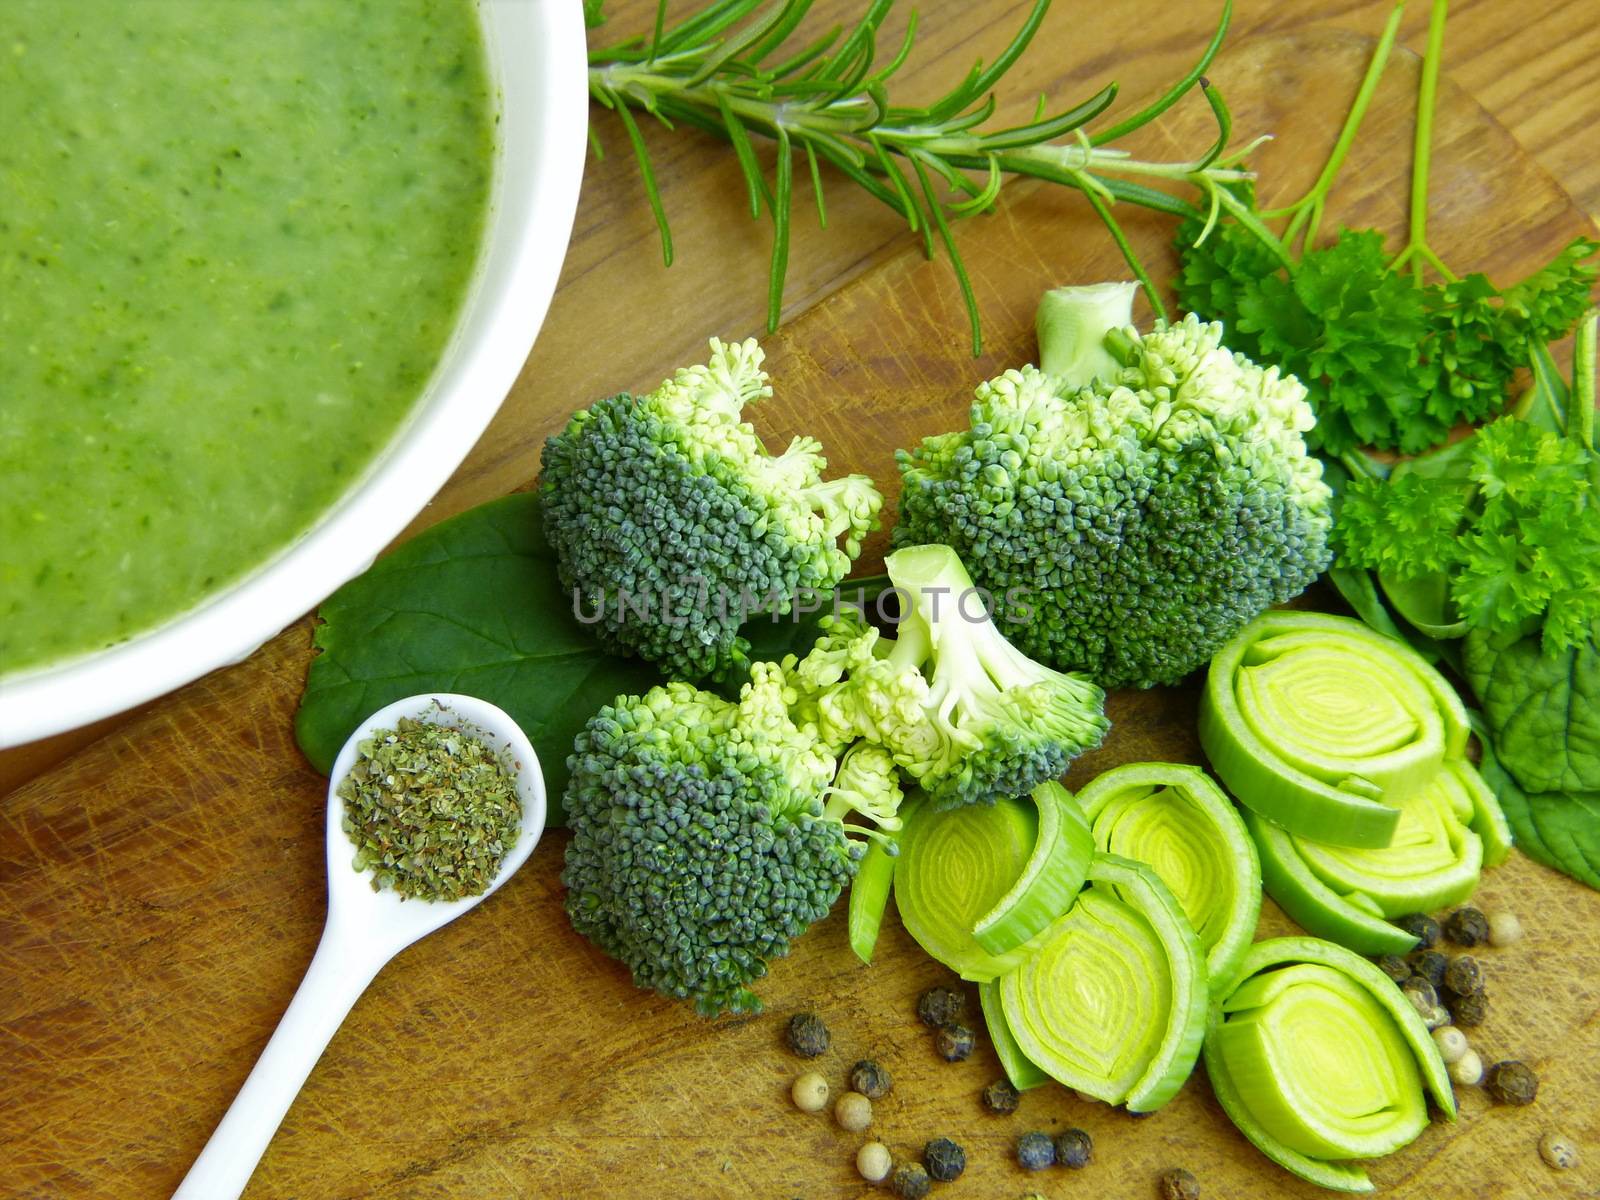 In images broccoli soup on bowl over wood background